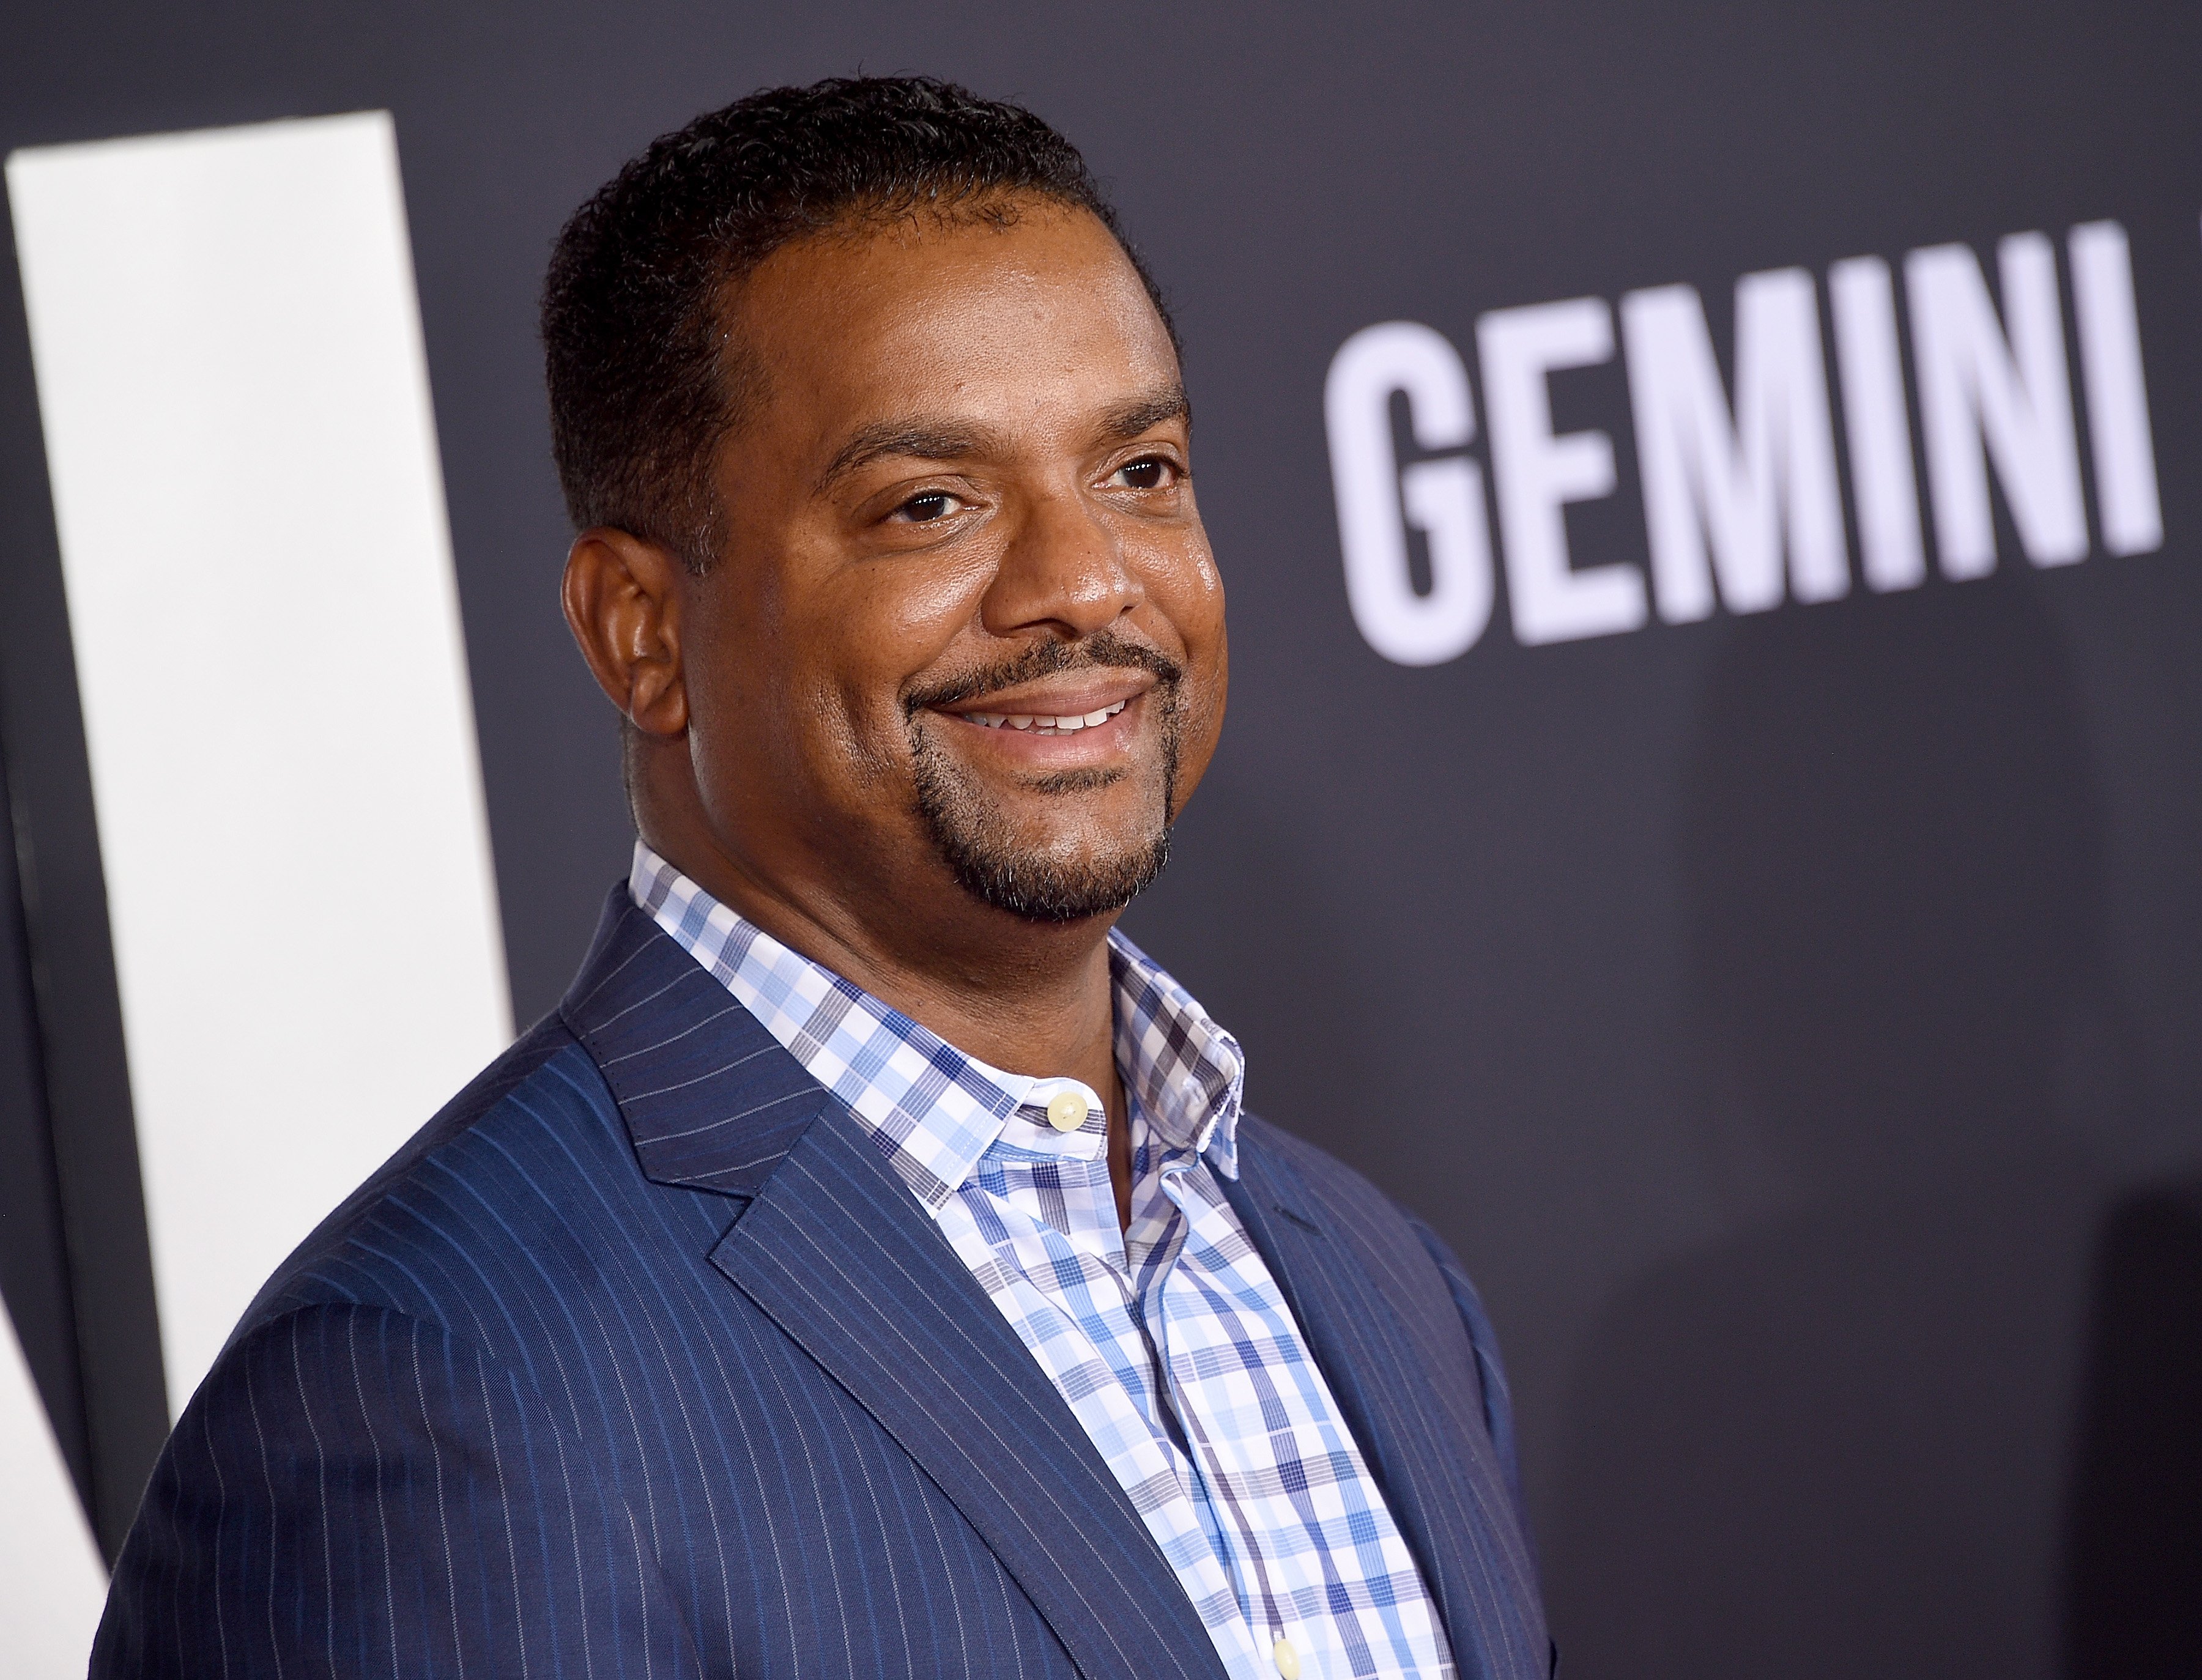 Alfonso Ribeiro at the Premiere Of "Gemini Man" on October 6, 2019 in Hollywood, California.| Source: Getty Images